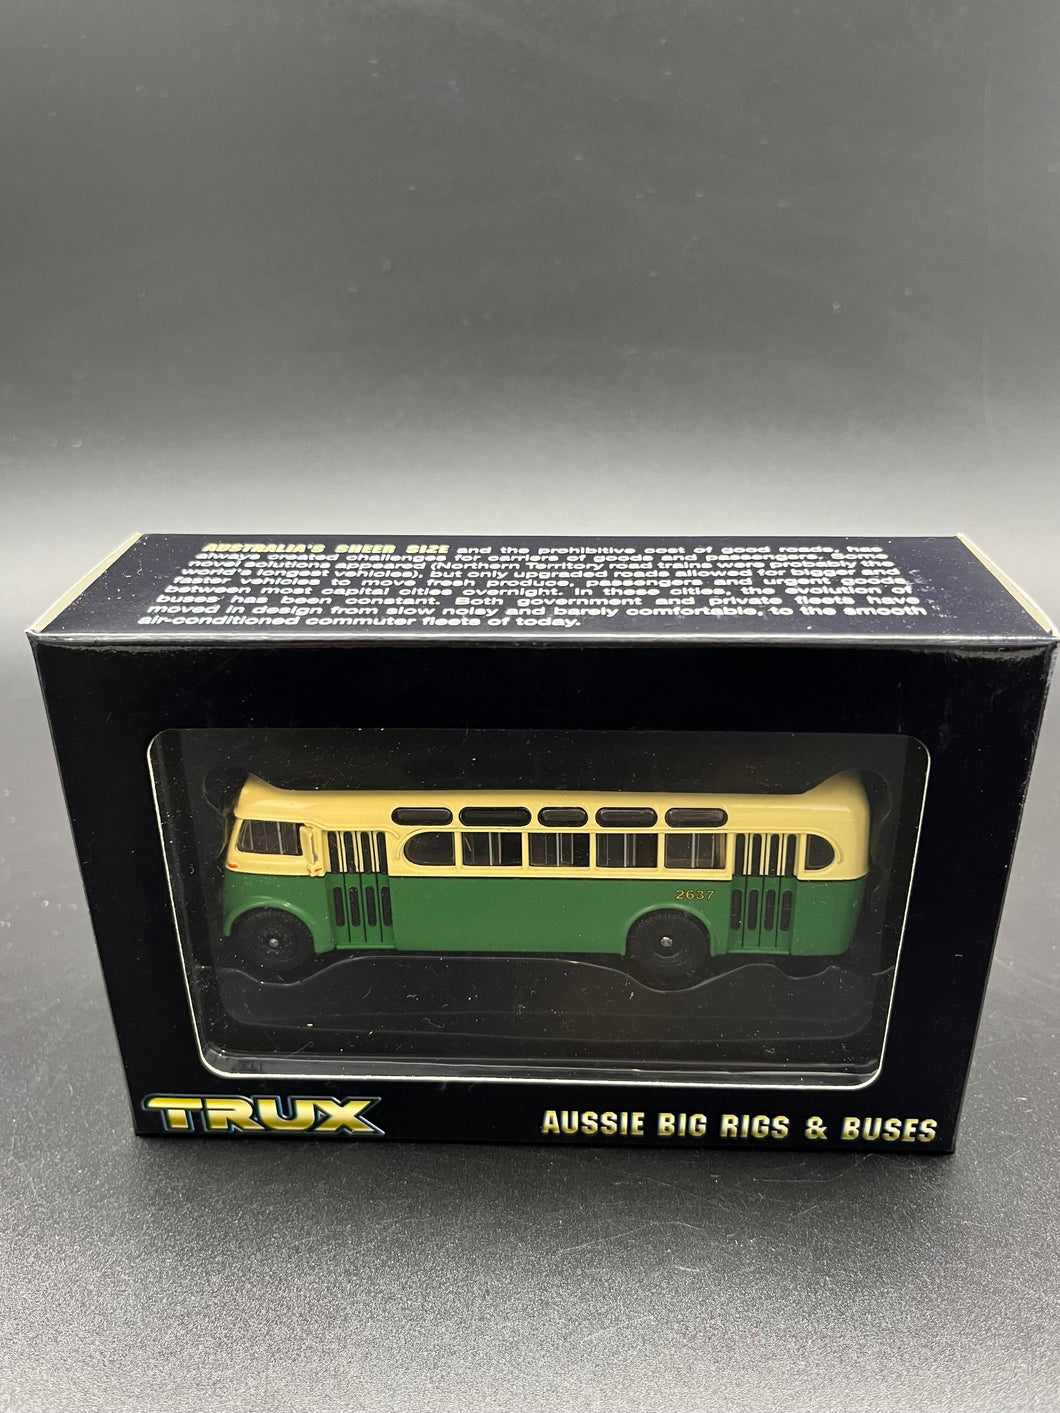 TRUX - 1952 Leyland Tiger OPS2 Single Deck Bus - Route 40